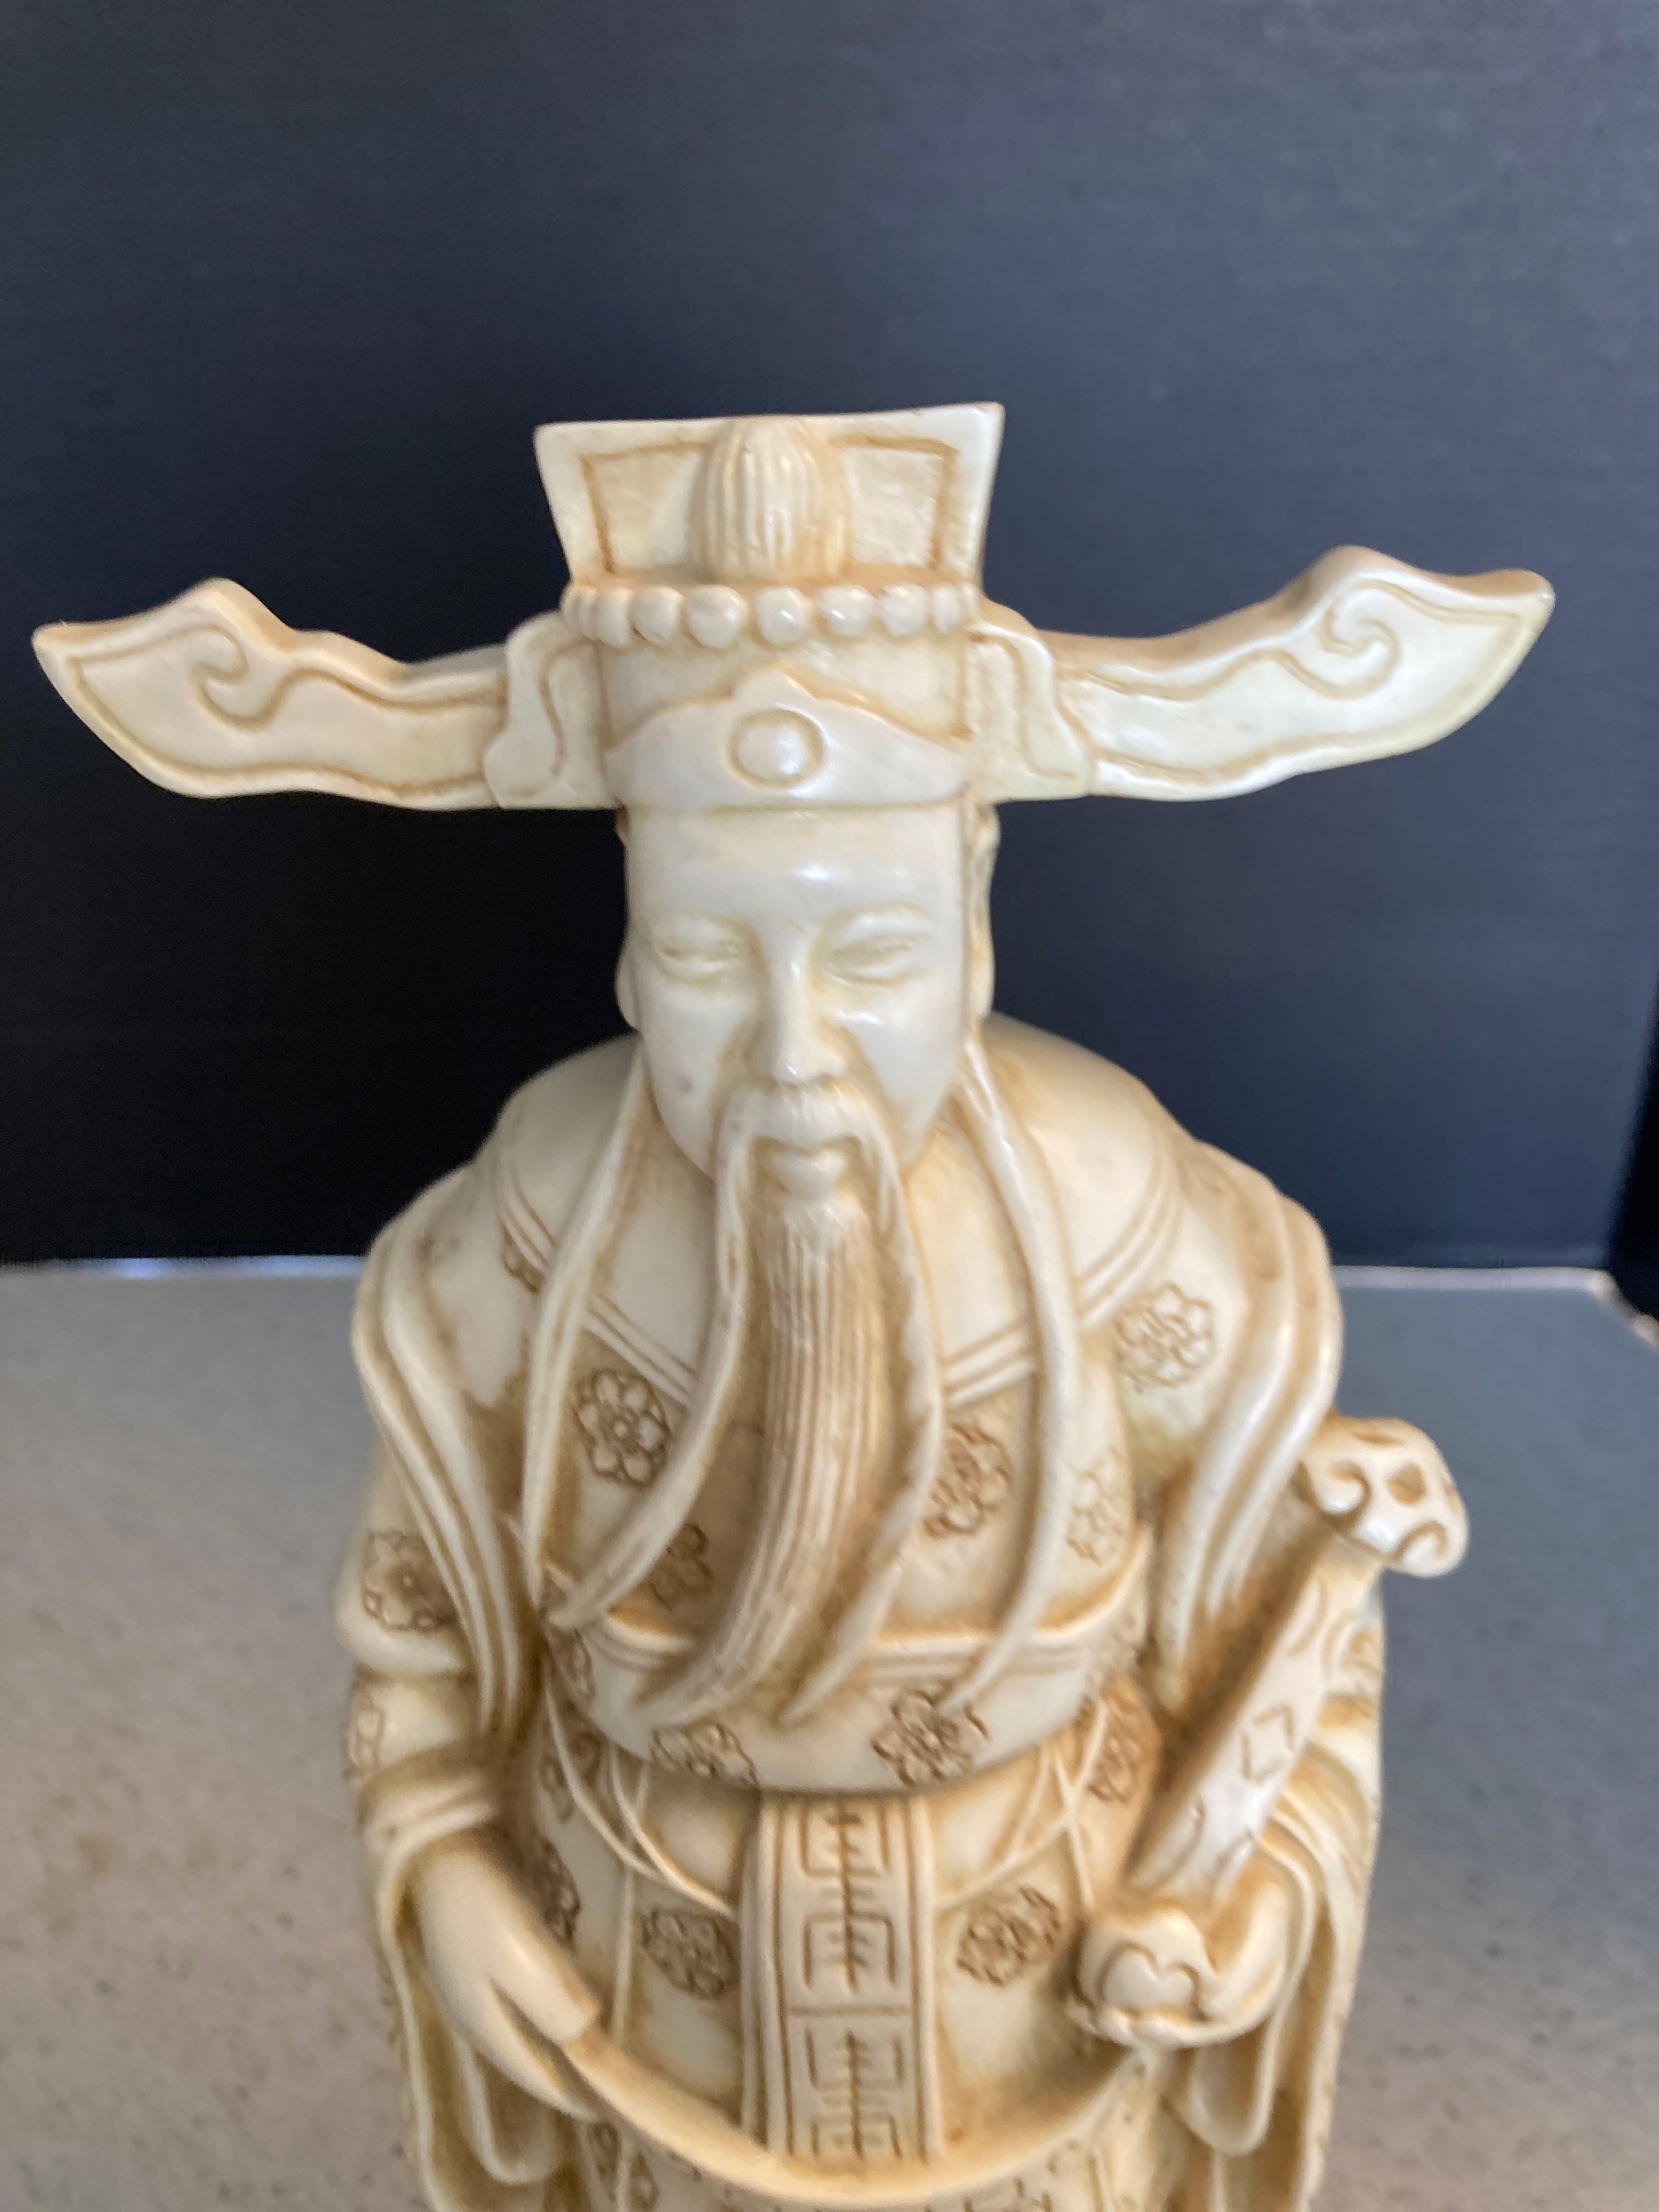 2 asian wise man figurines